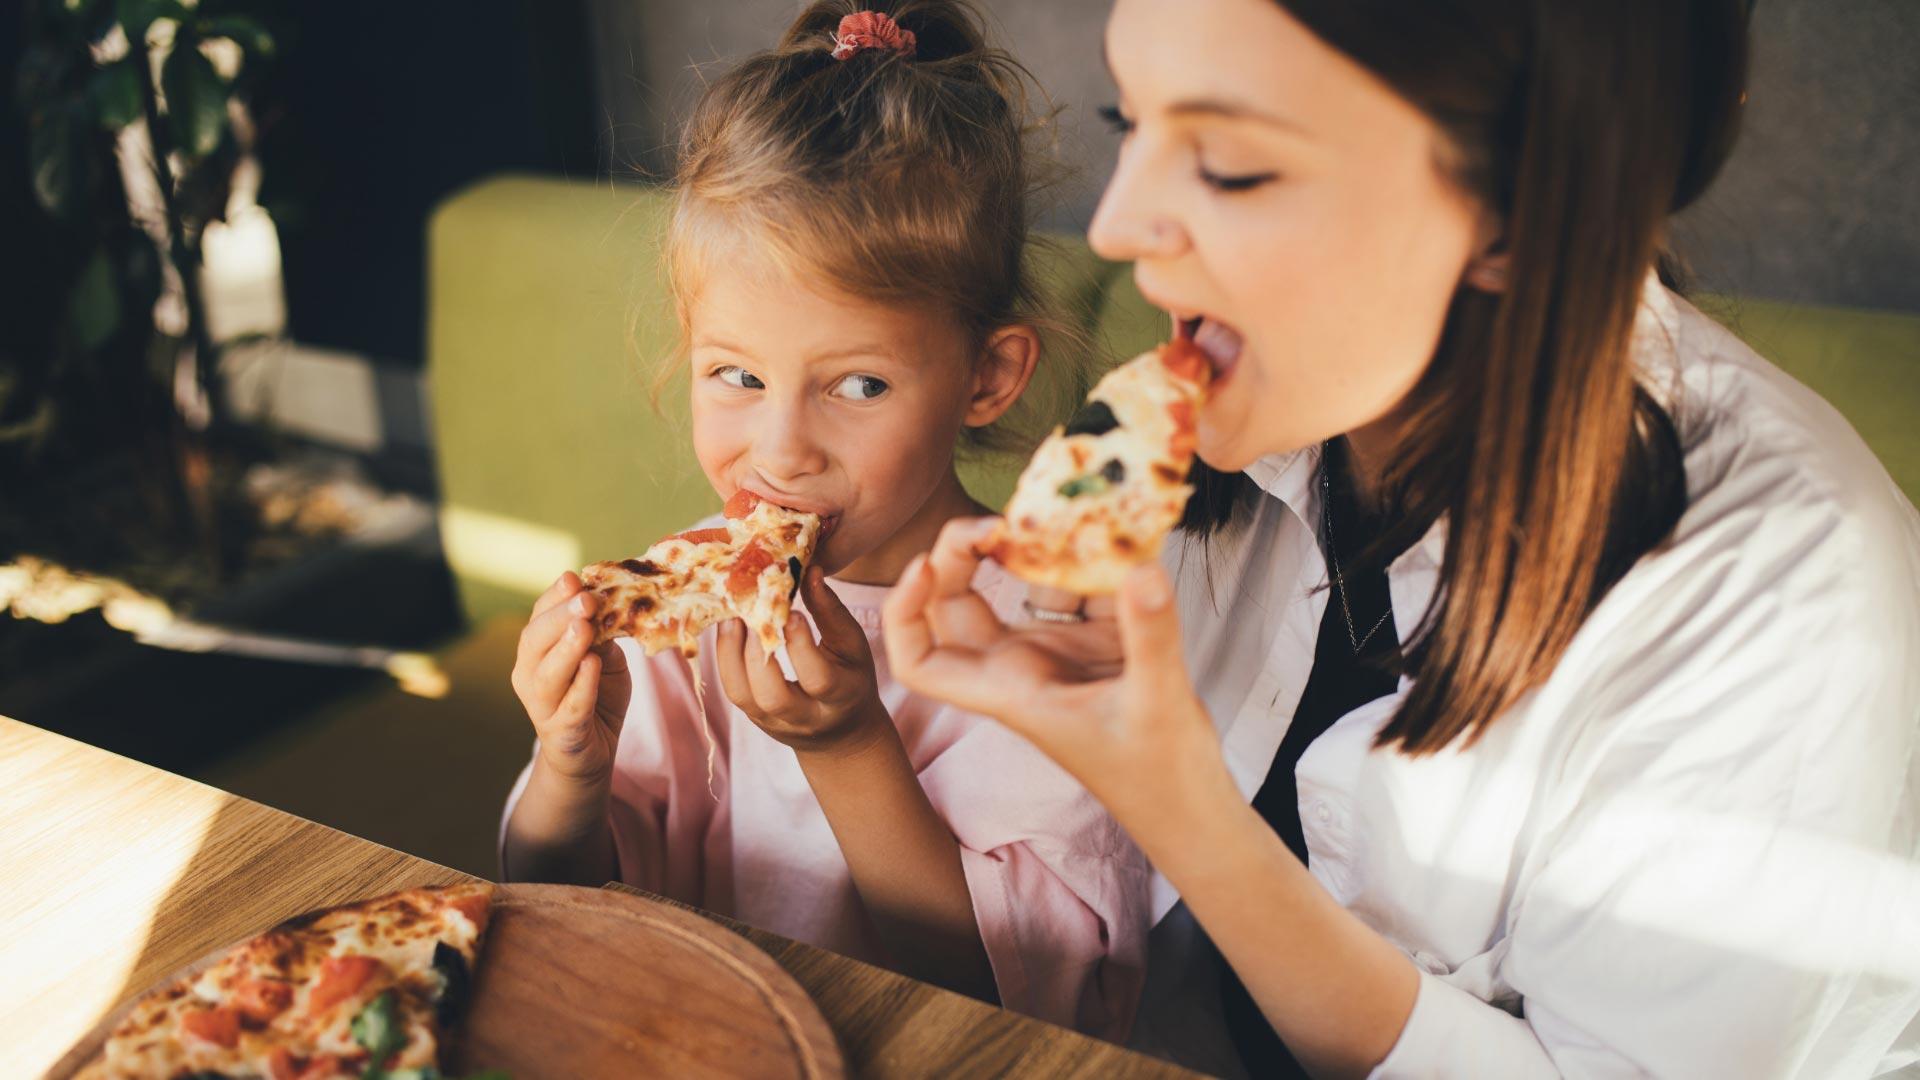 Mother and daughter eating pizza together, smiling and having fun.